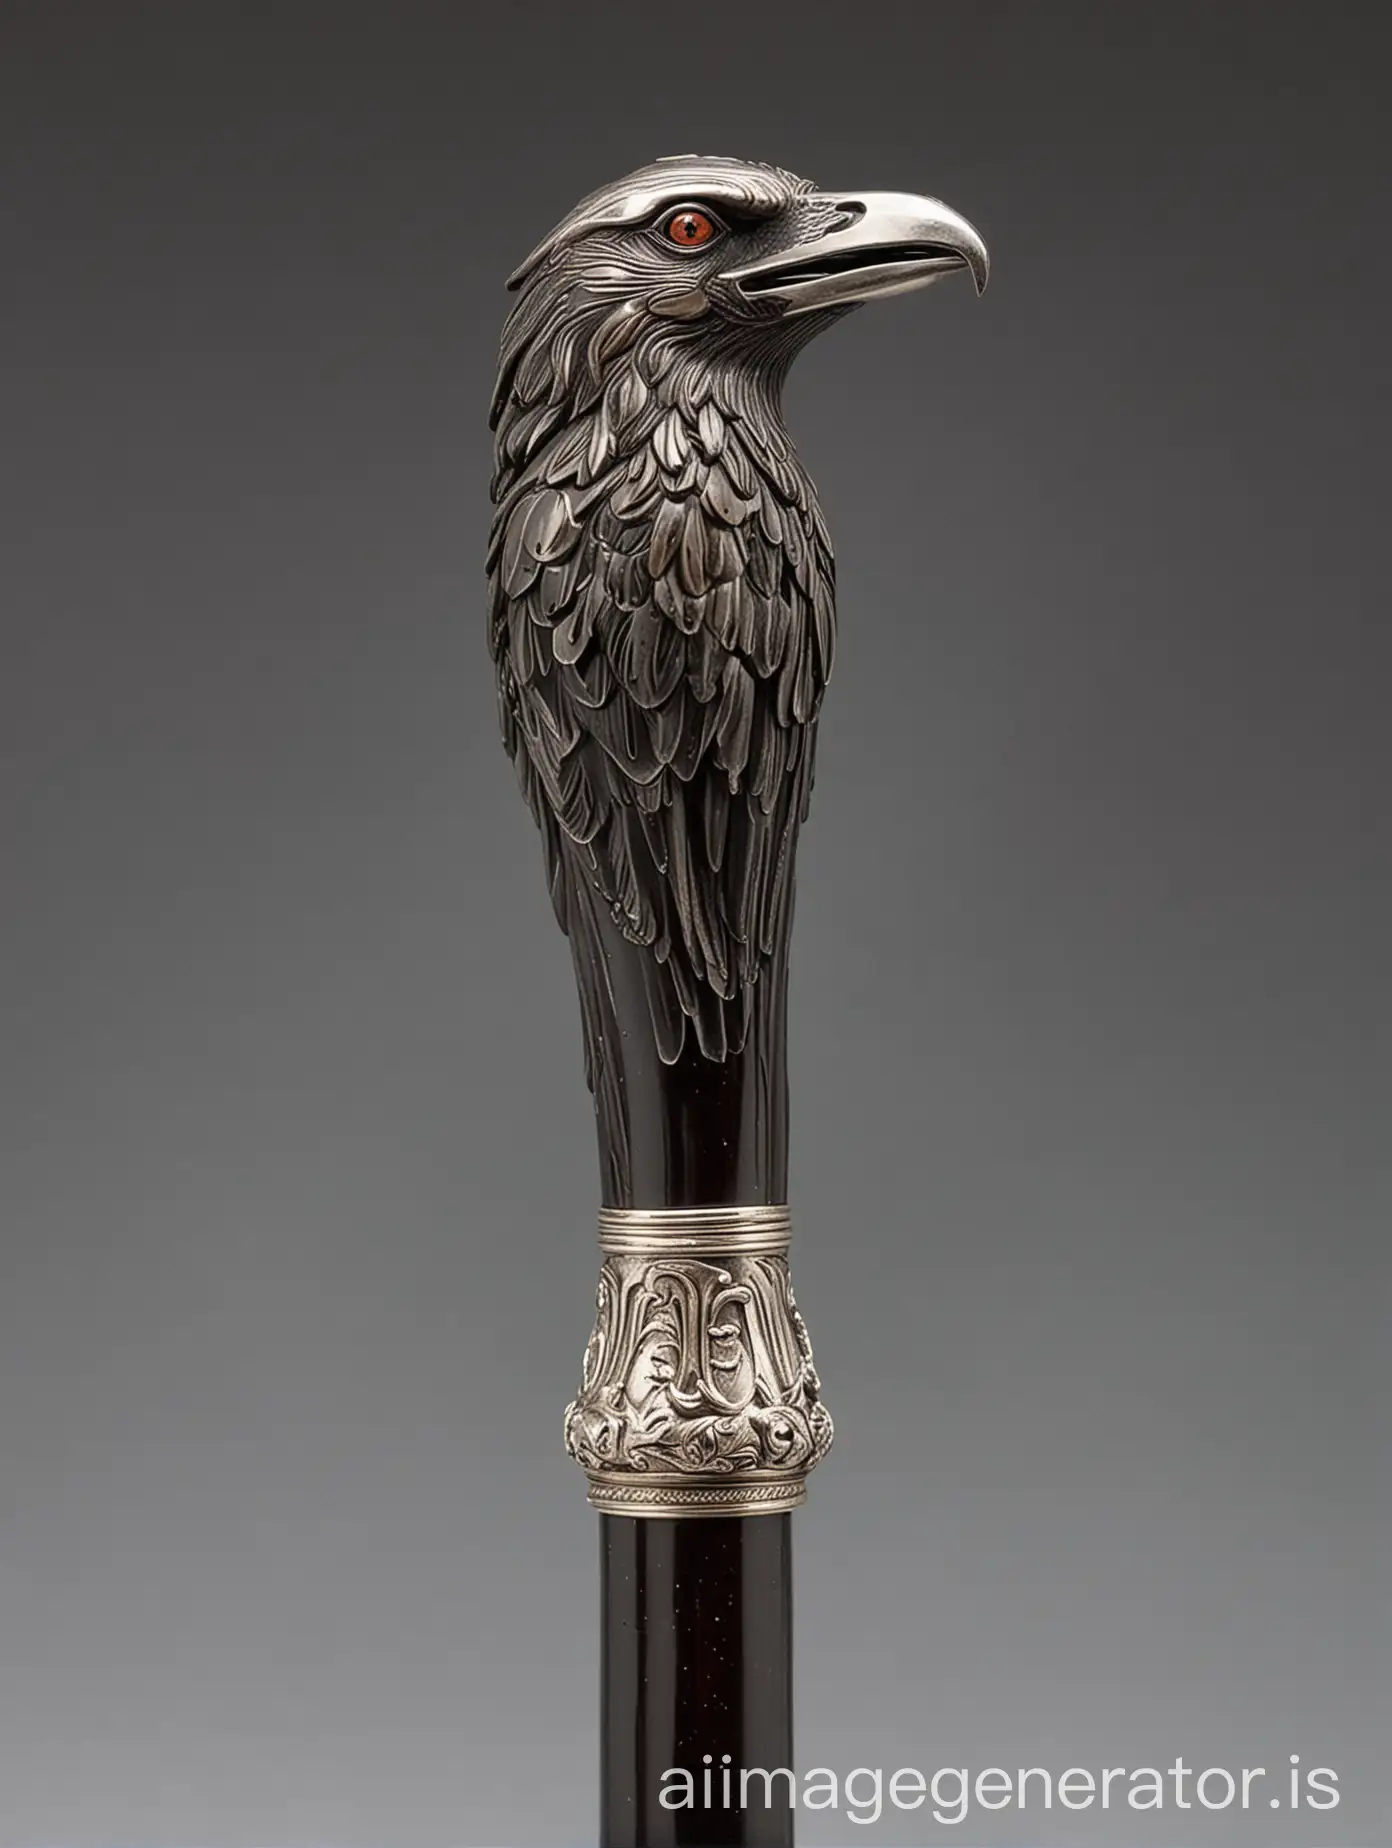 gentleman's cane with a silver crow's head handle